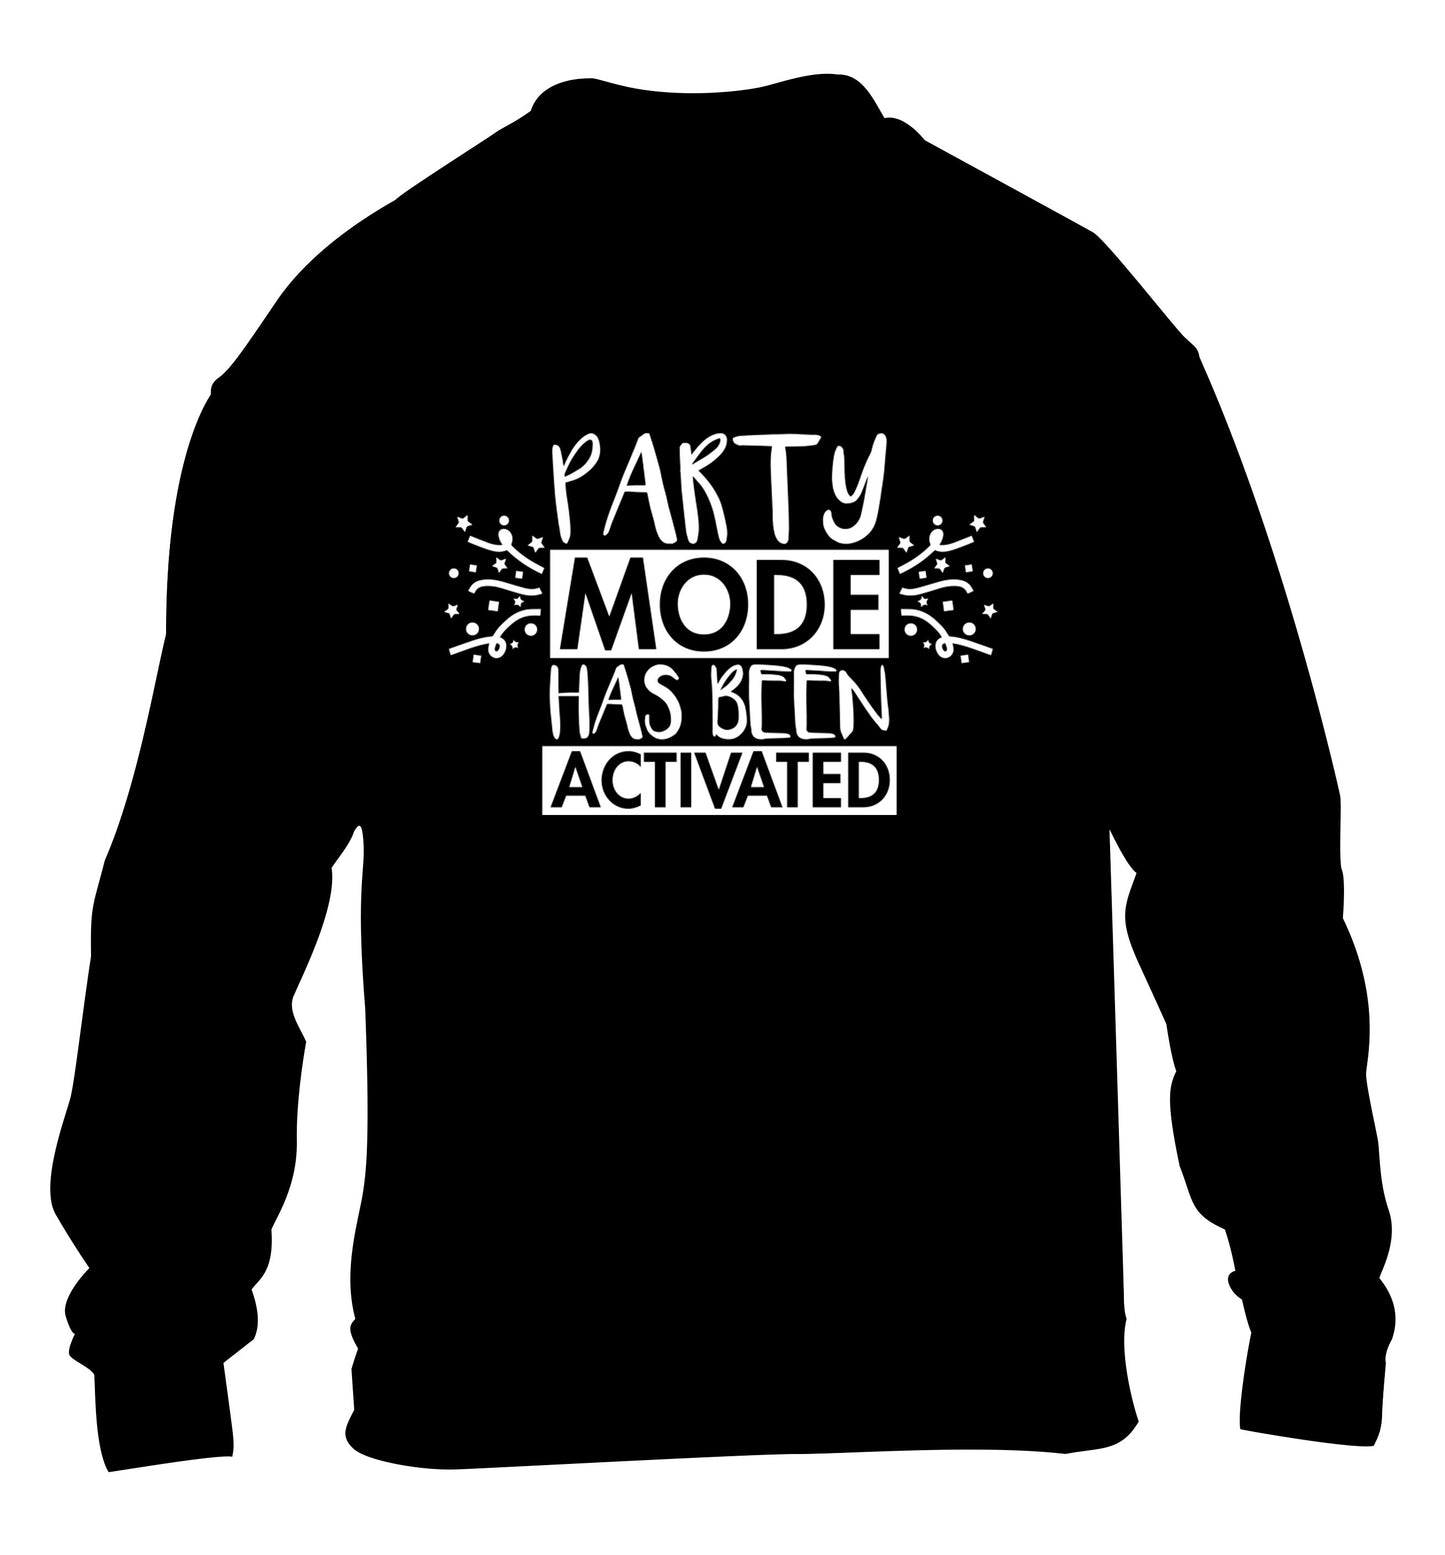 Please do not disturb party mode has been activated children's black sweater 12-14 Years